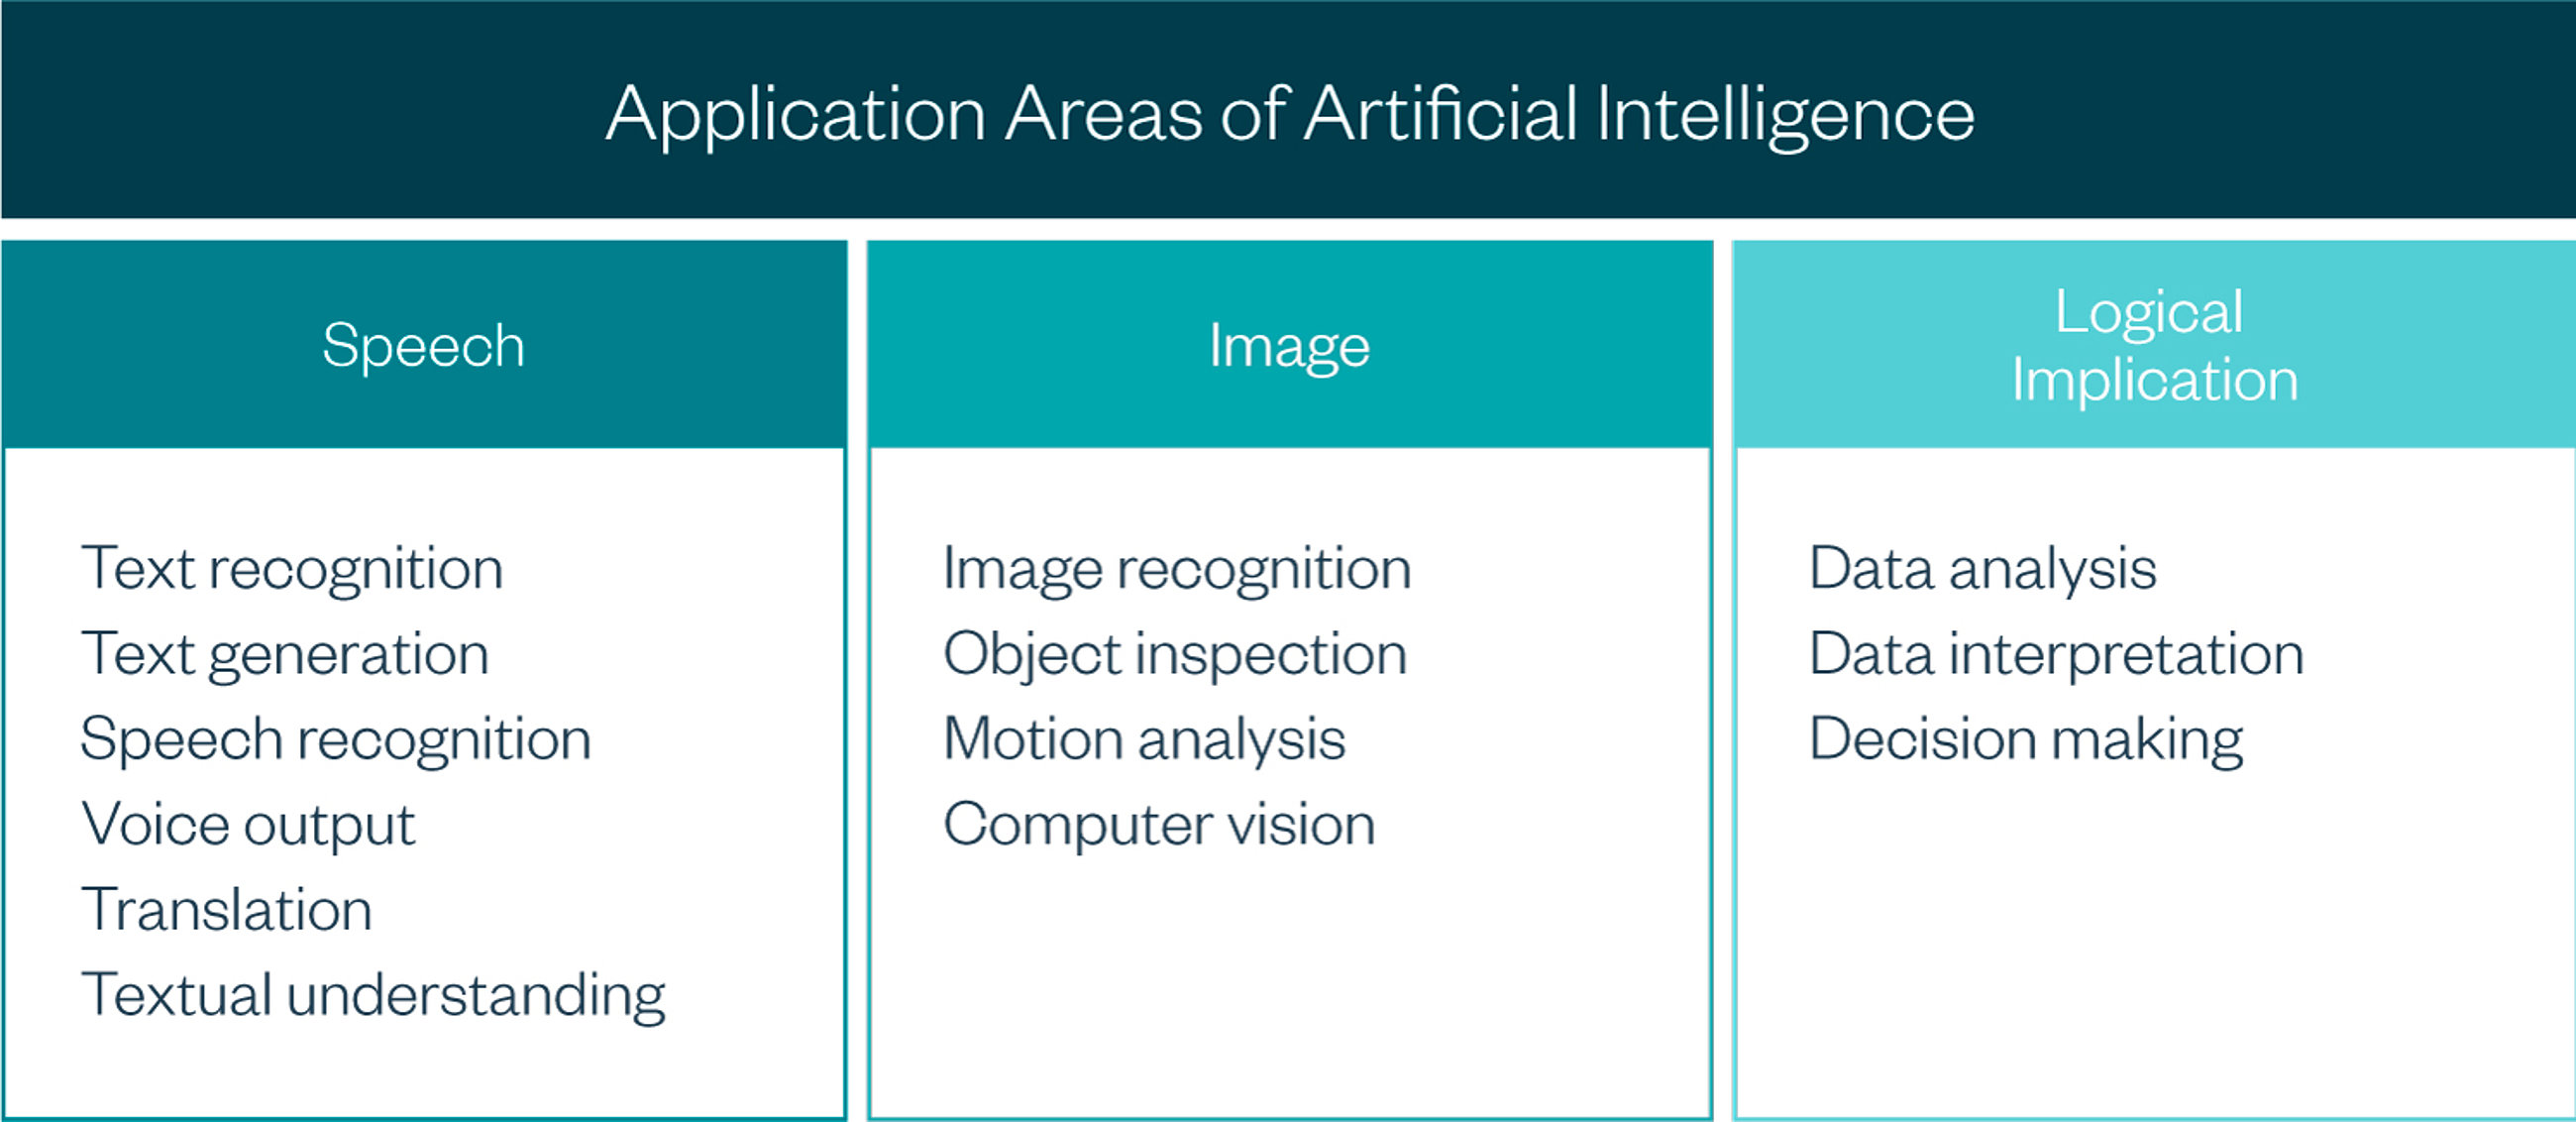 Application Areas of Artificial Intelligence